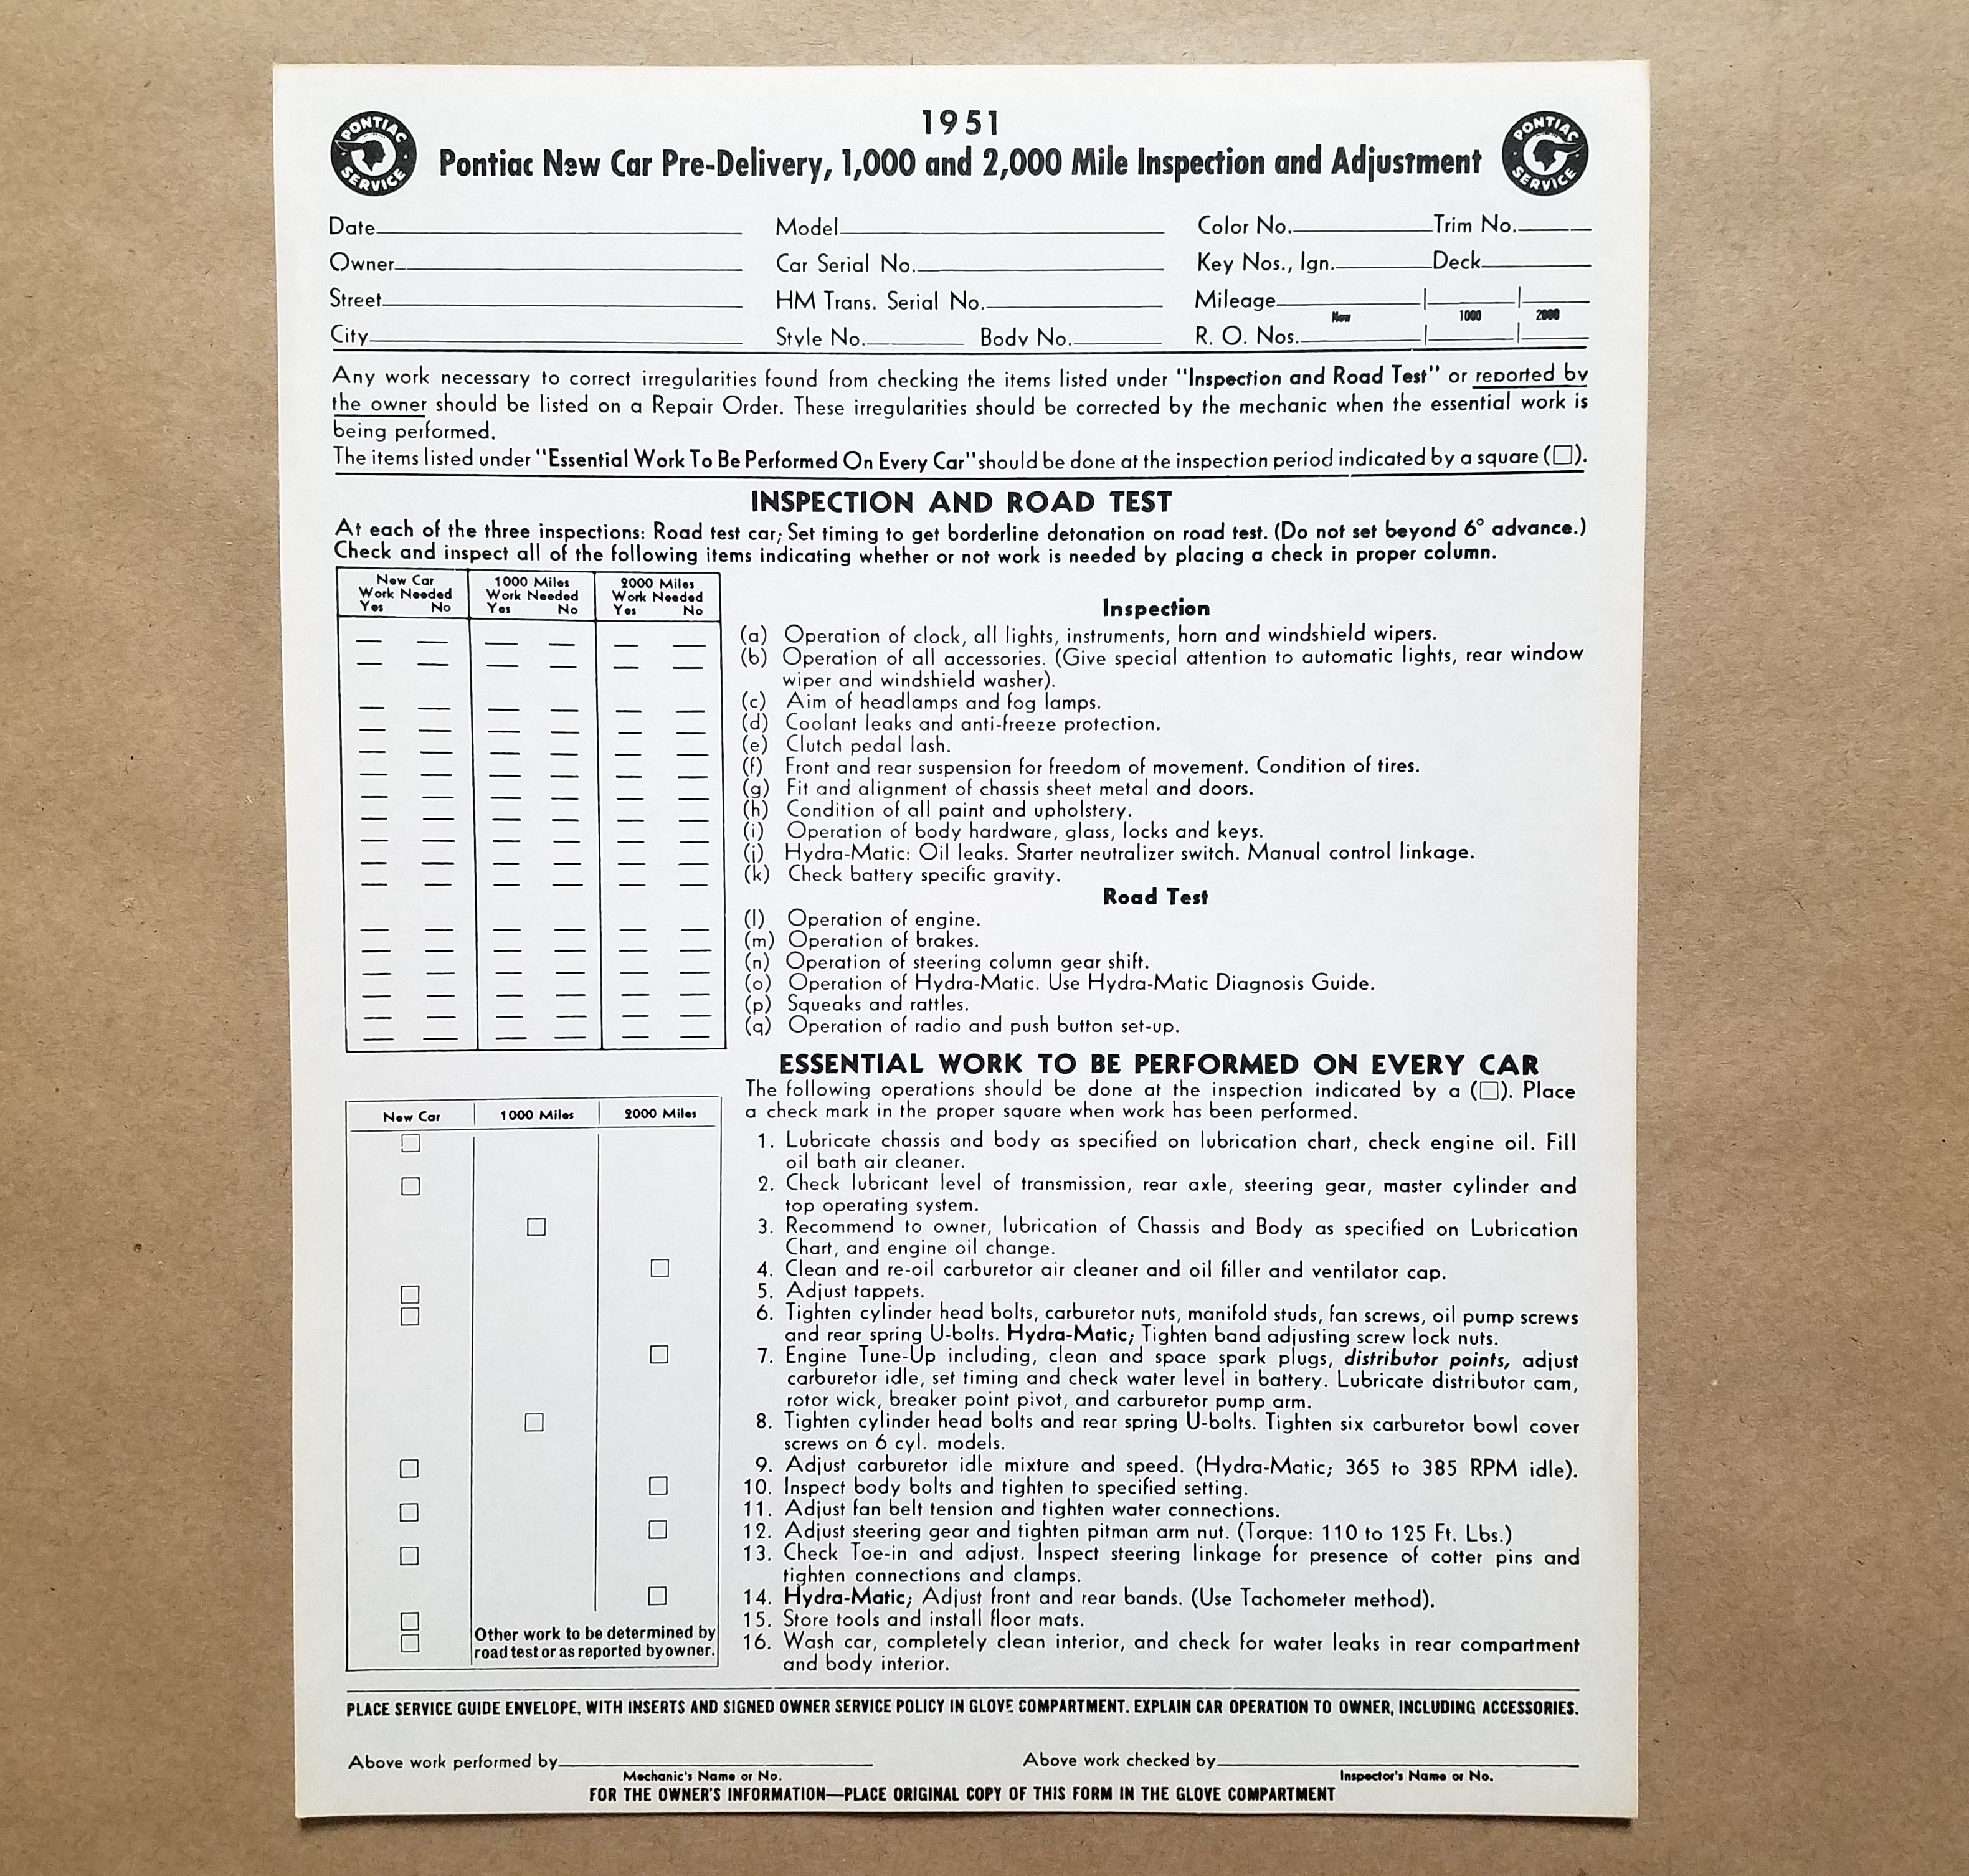 1951 New Car Pre-Delivery Sheet